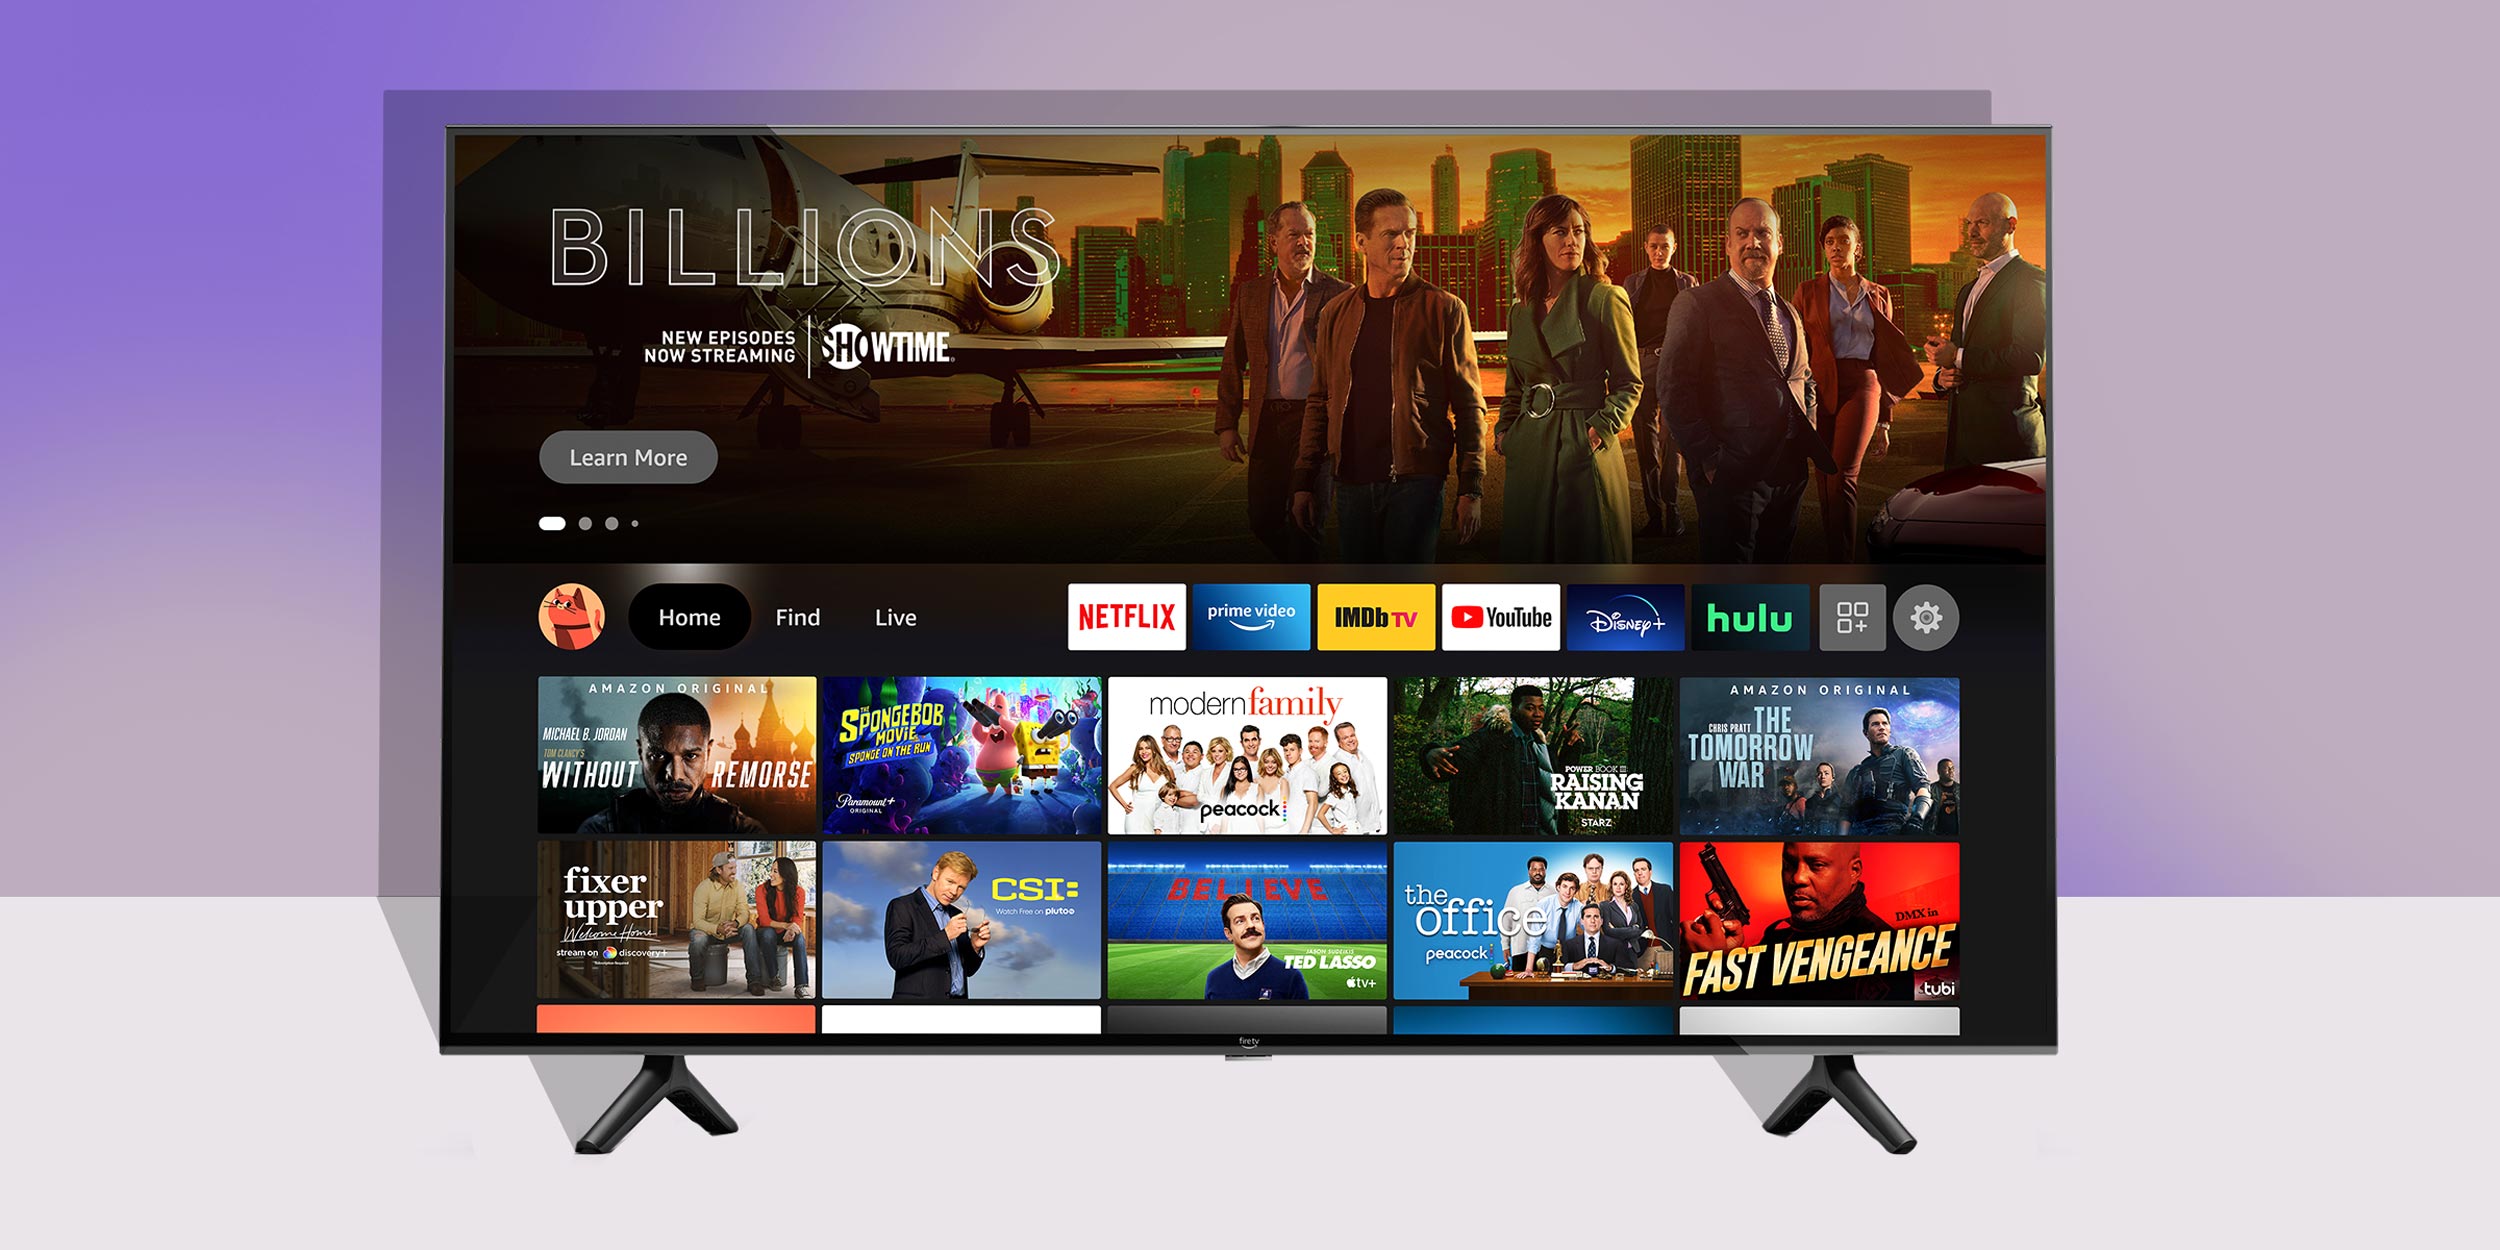 Amazon introduced televisions priced from $370